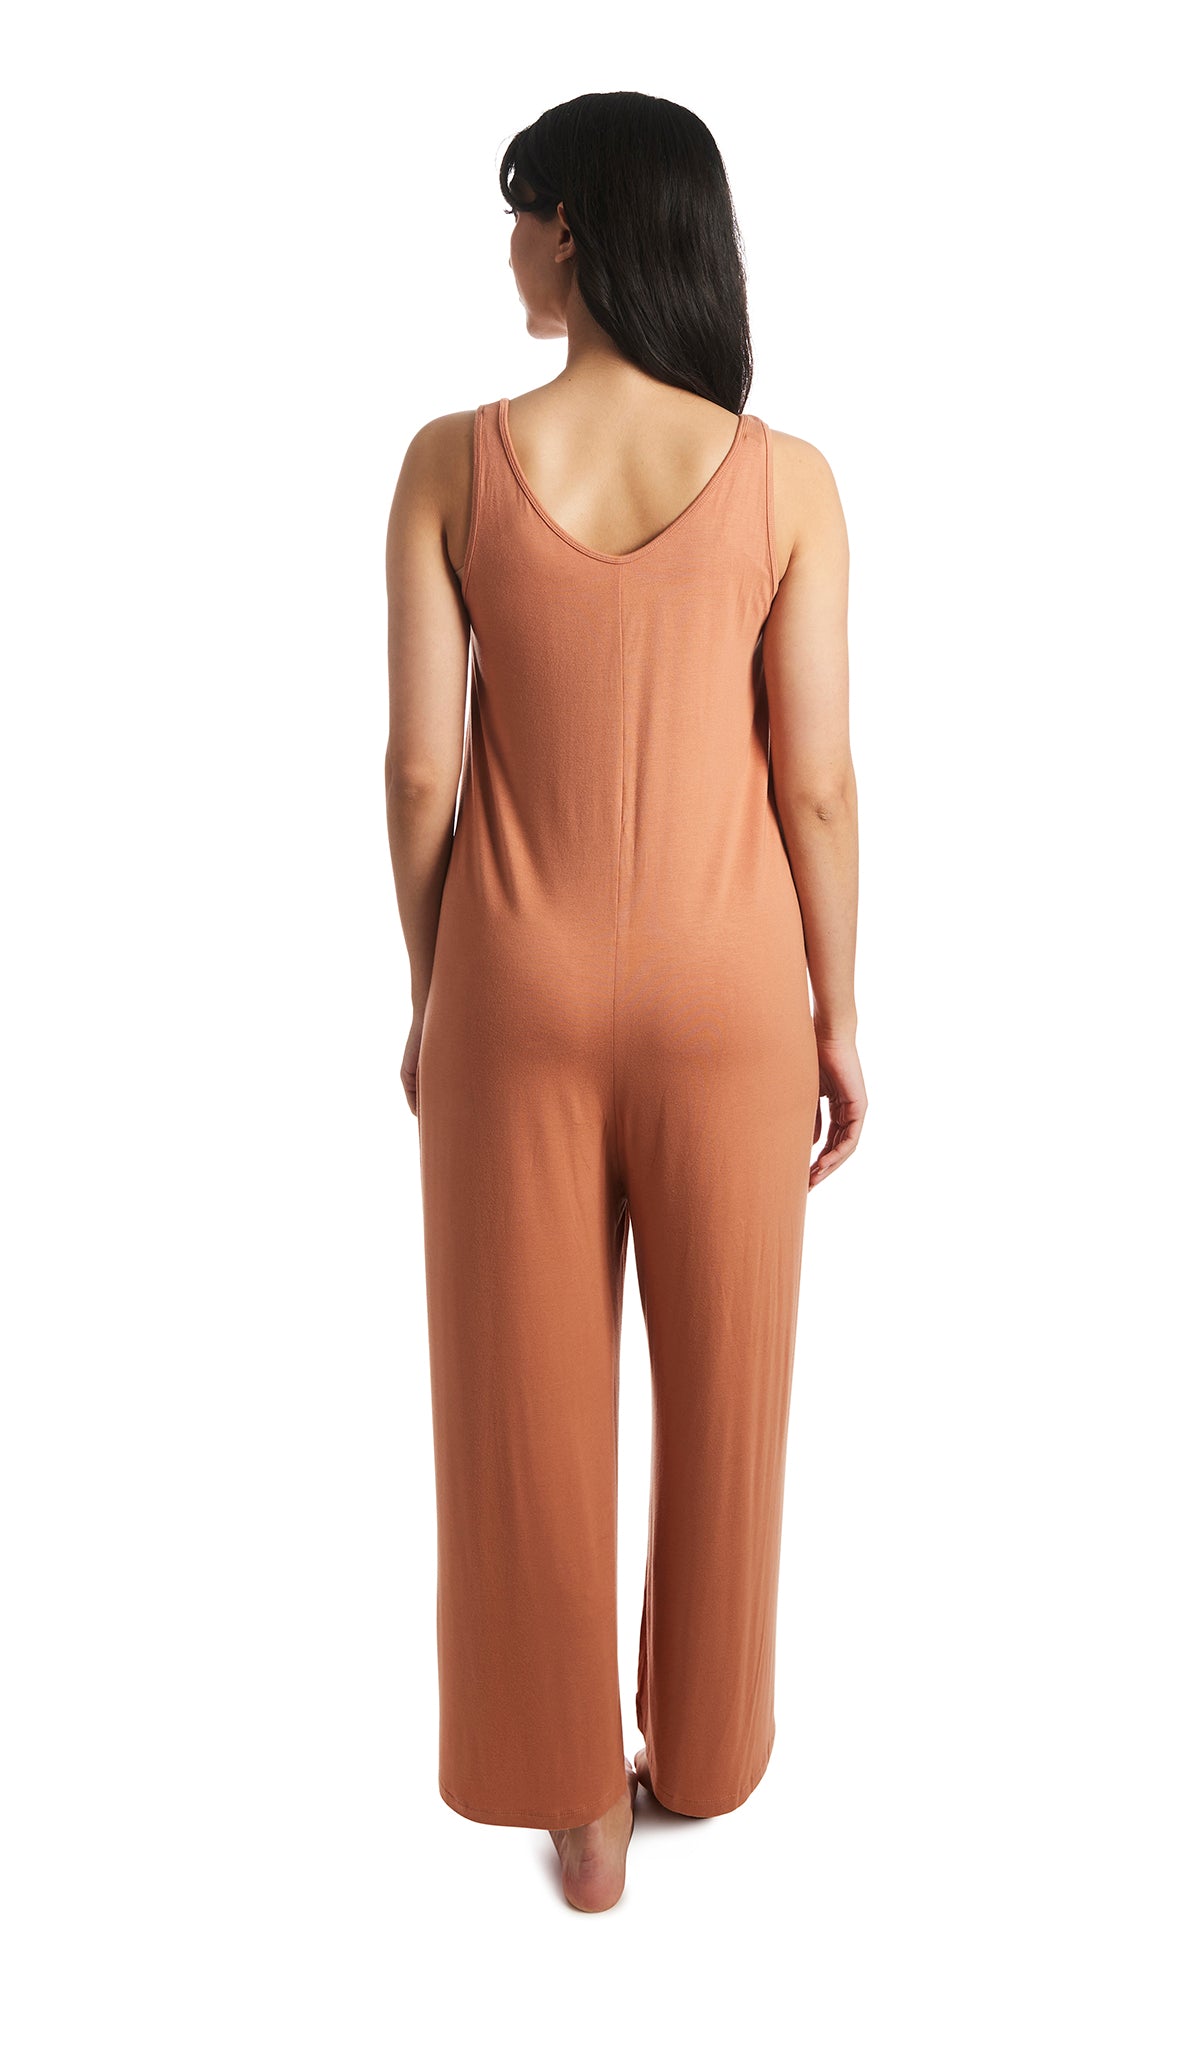 Sandstone Luana romper. Back shot of woman wearing sleeveless wide-leg romper with arms down to side.